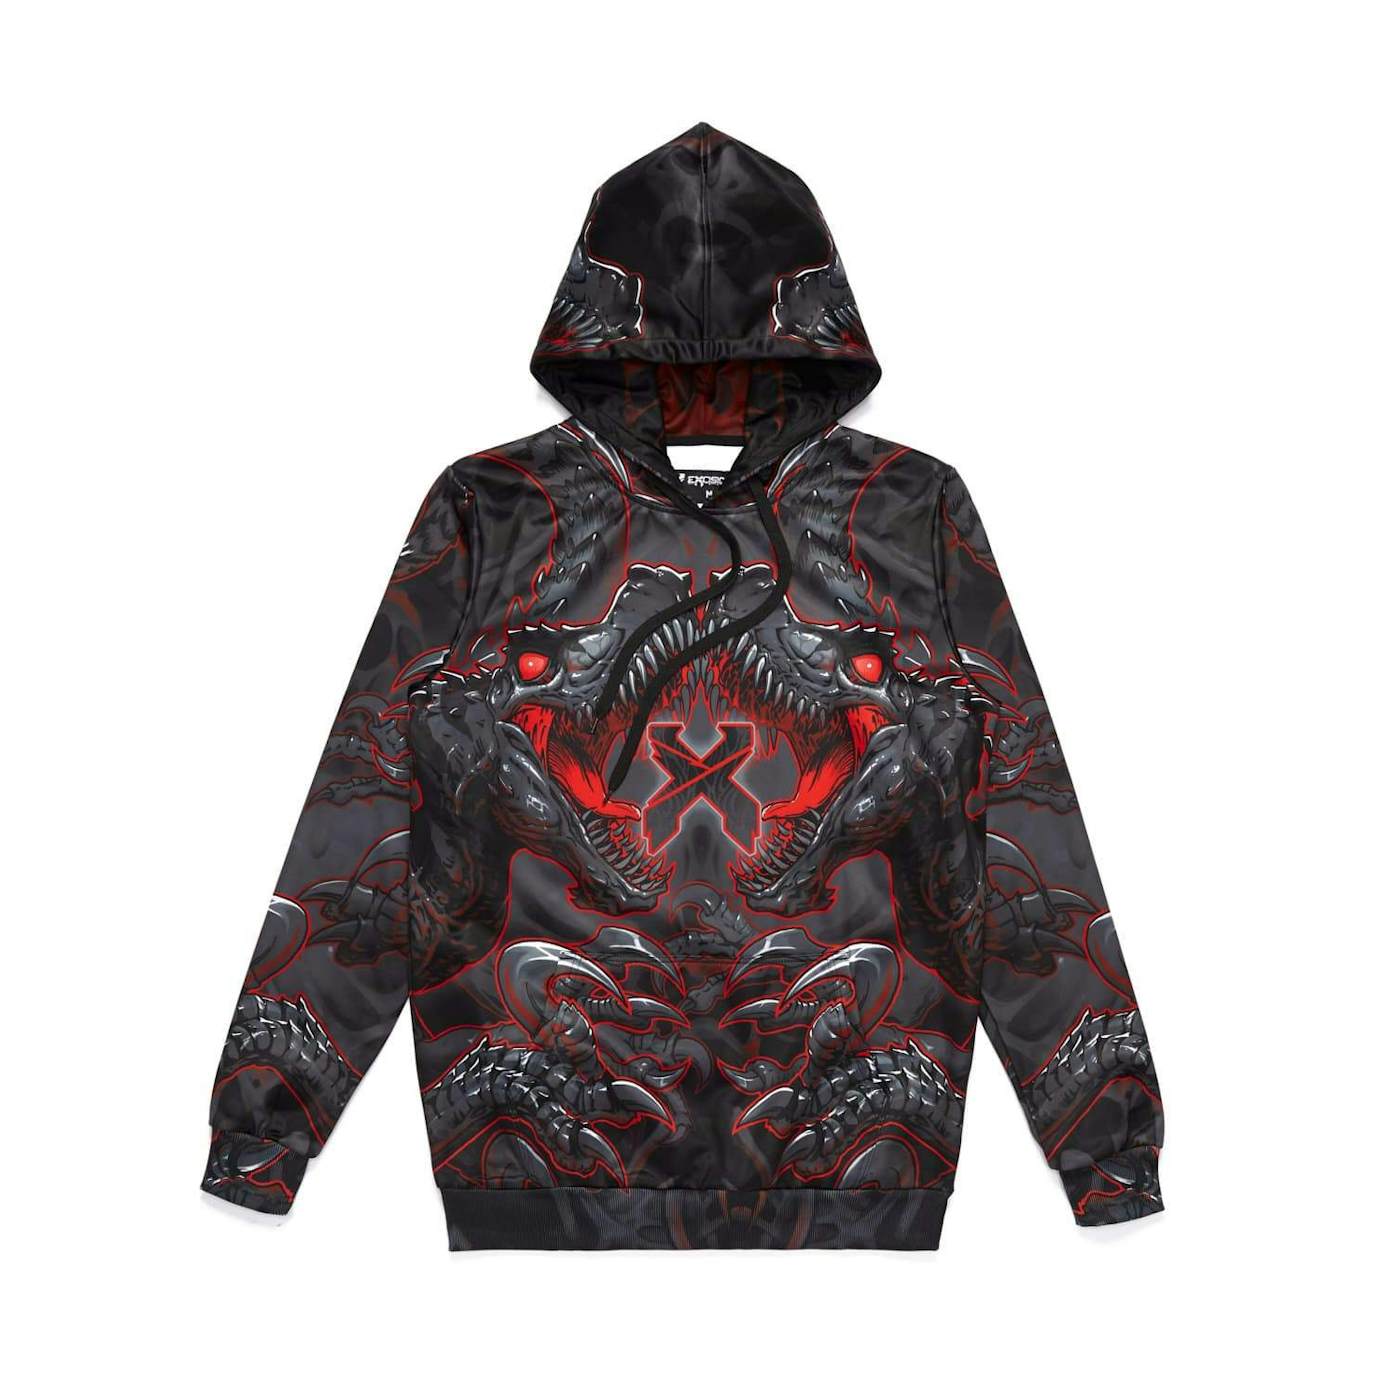 Excision 'Raptor Attack' Dye Sub Hoodie - Red